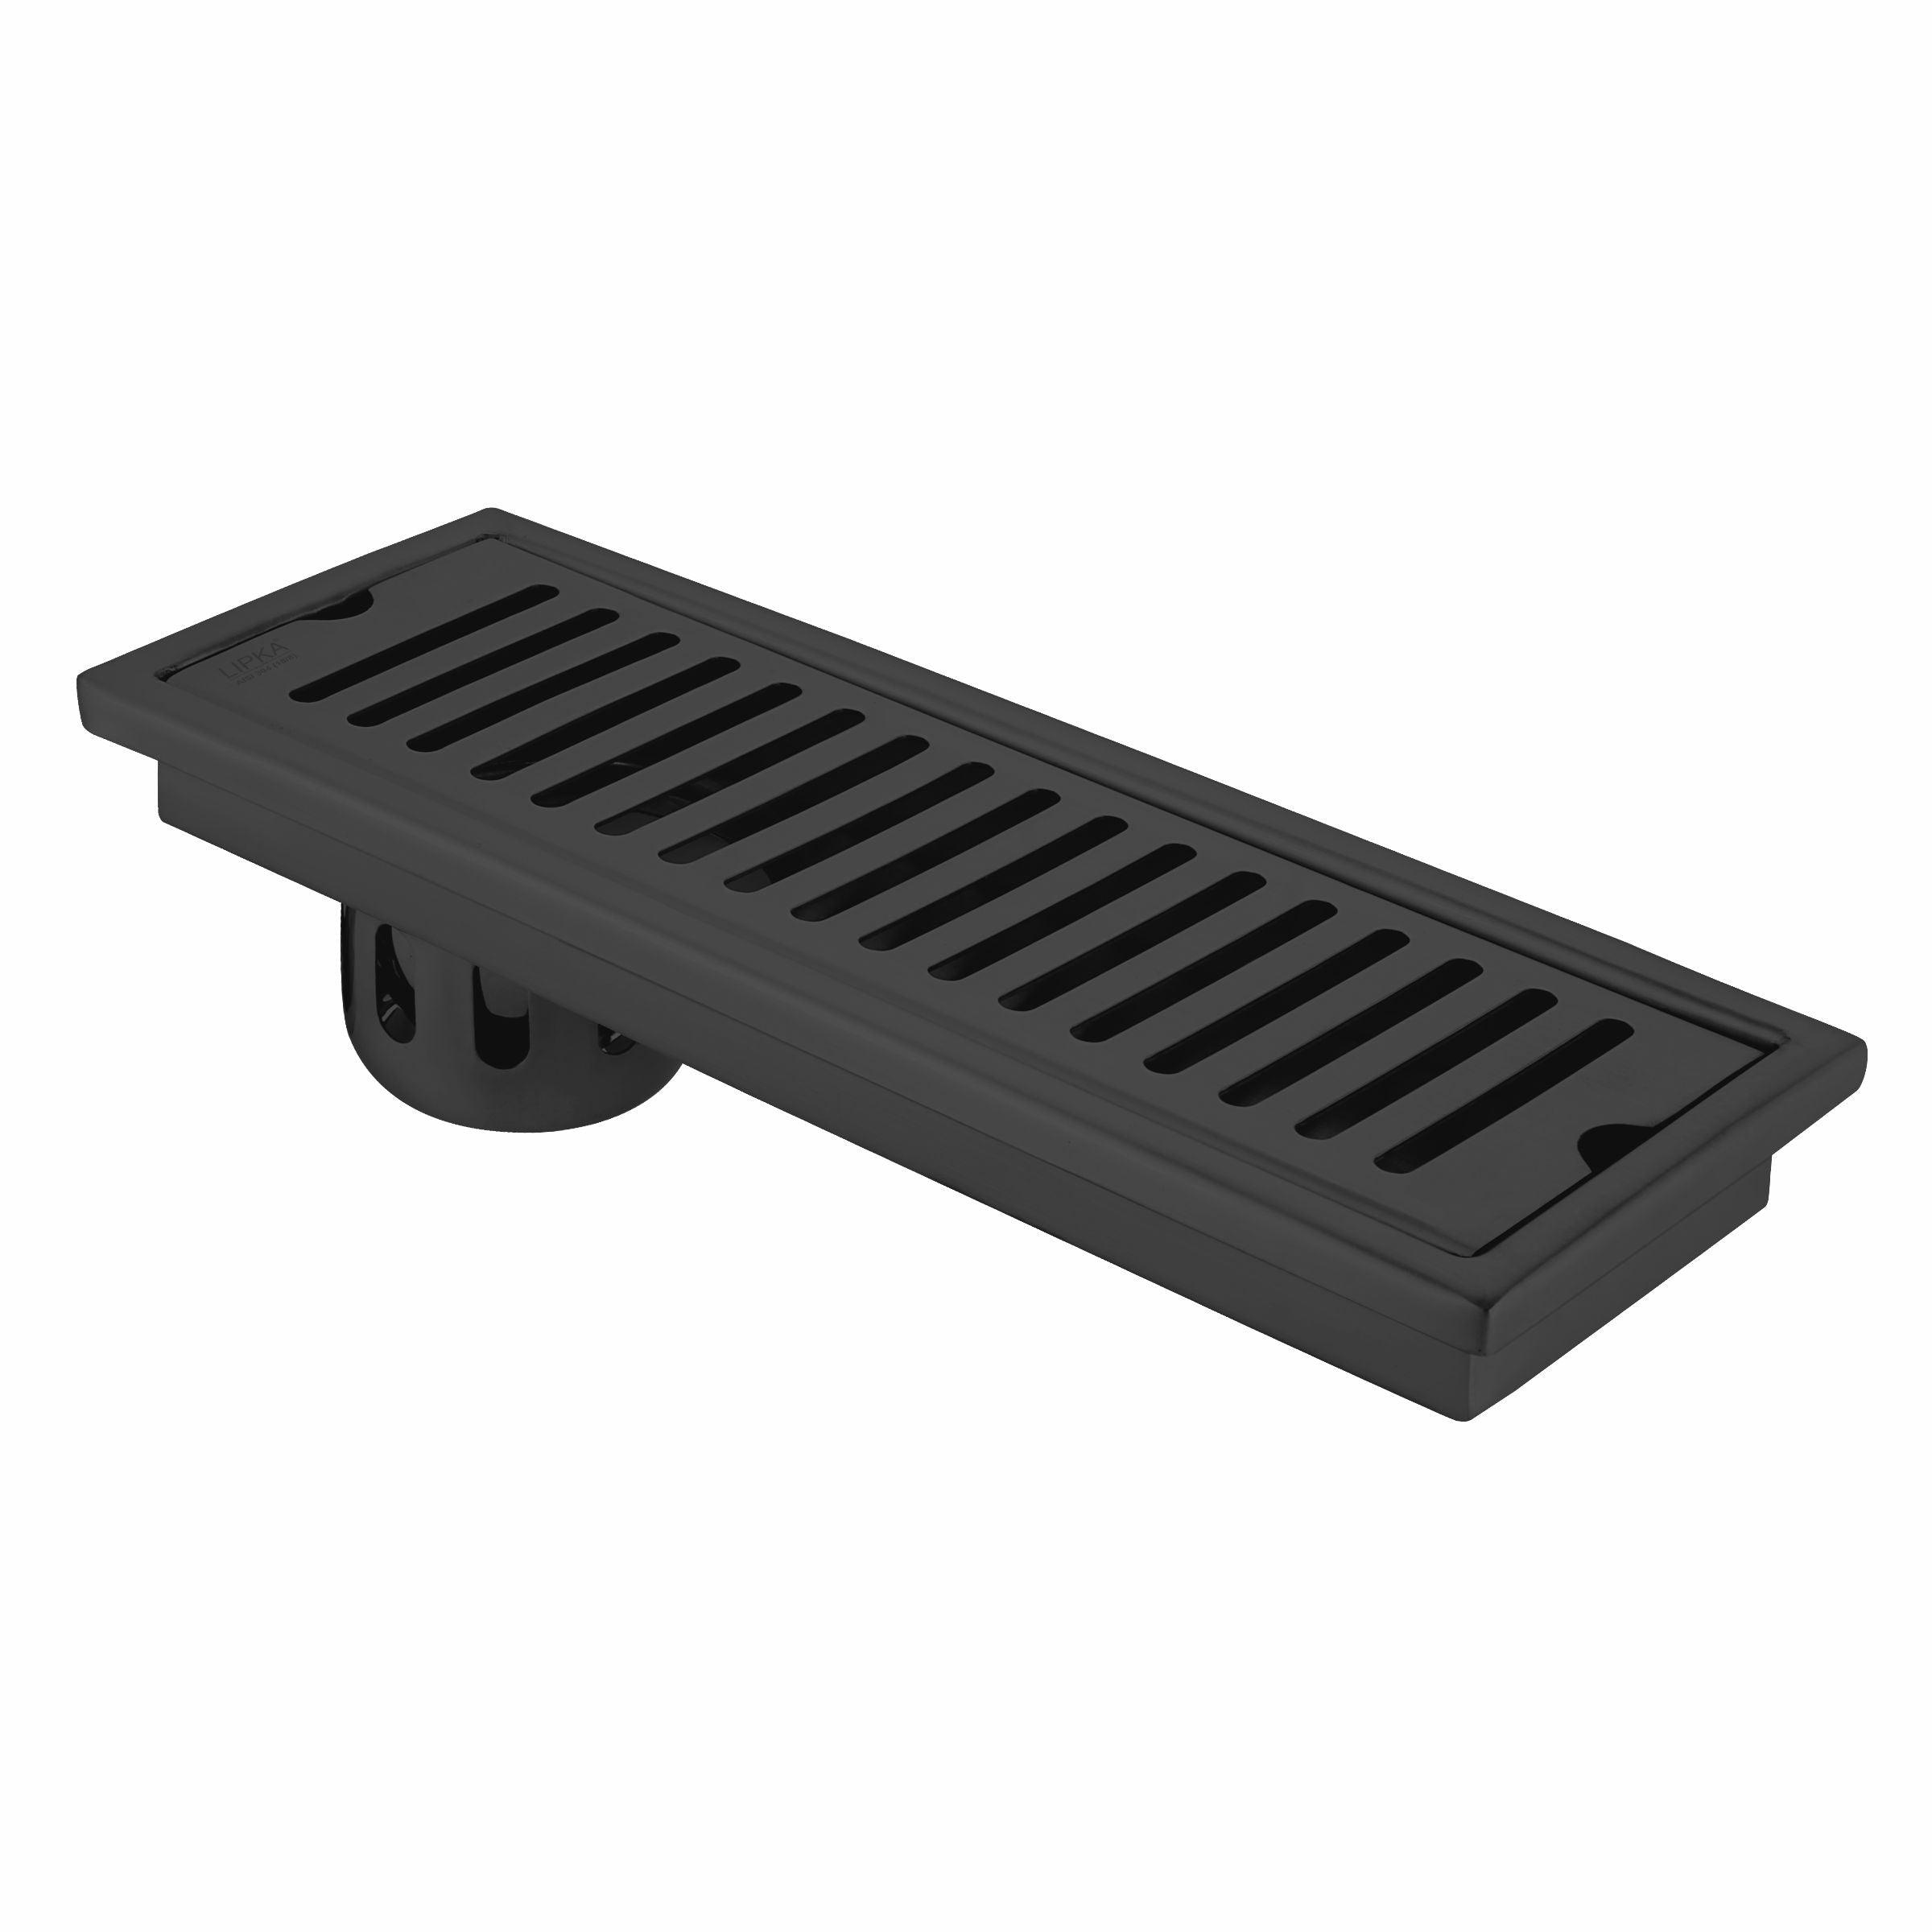 Vertical Shower Drain Channel - Black (12 x 5 Inches)